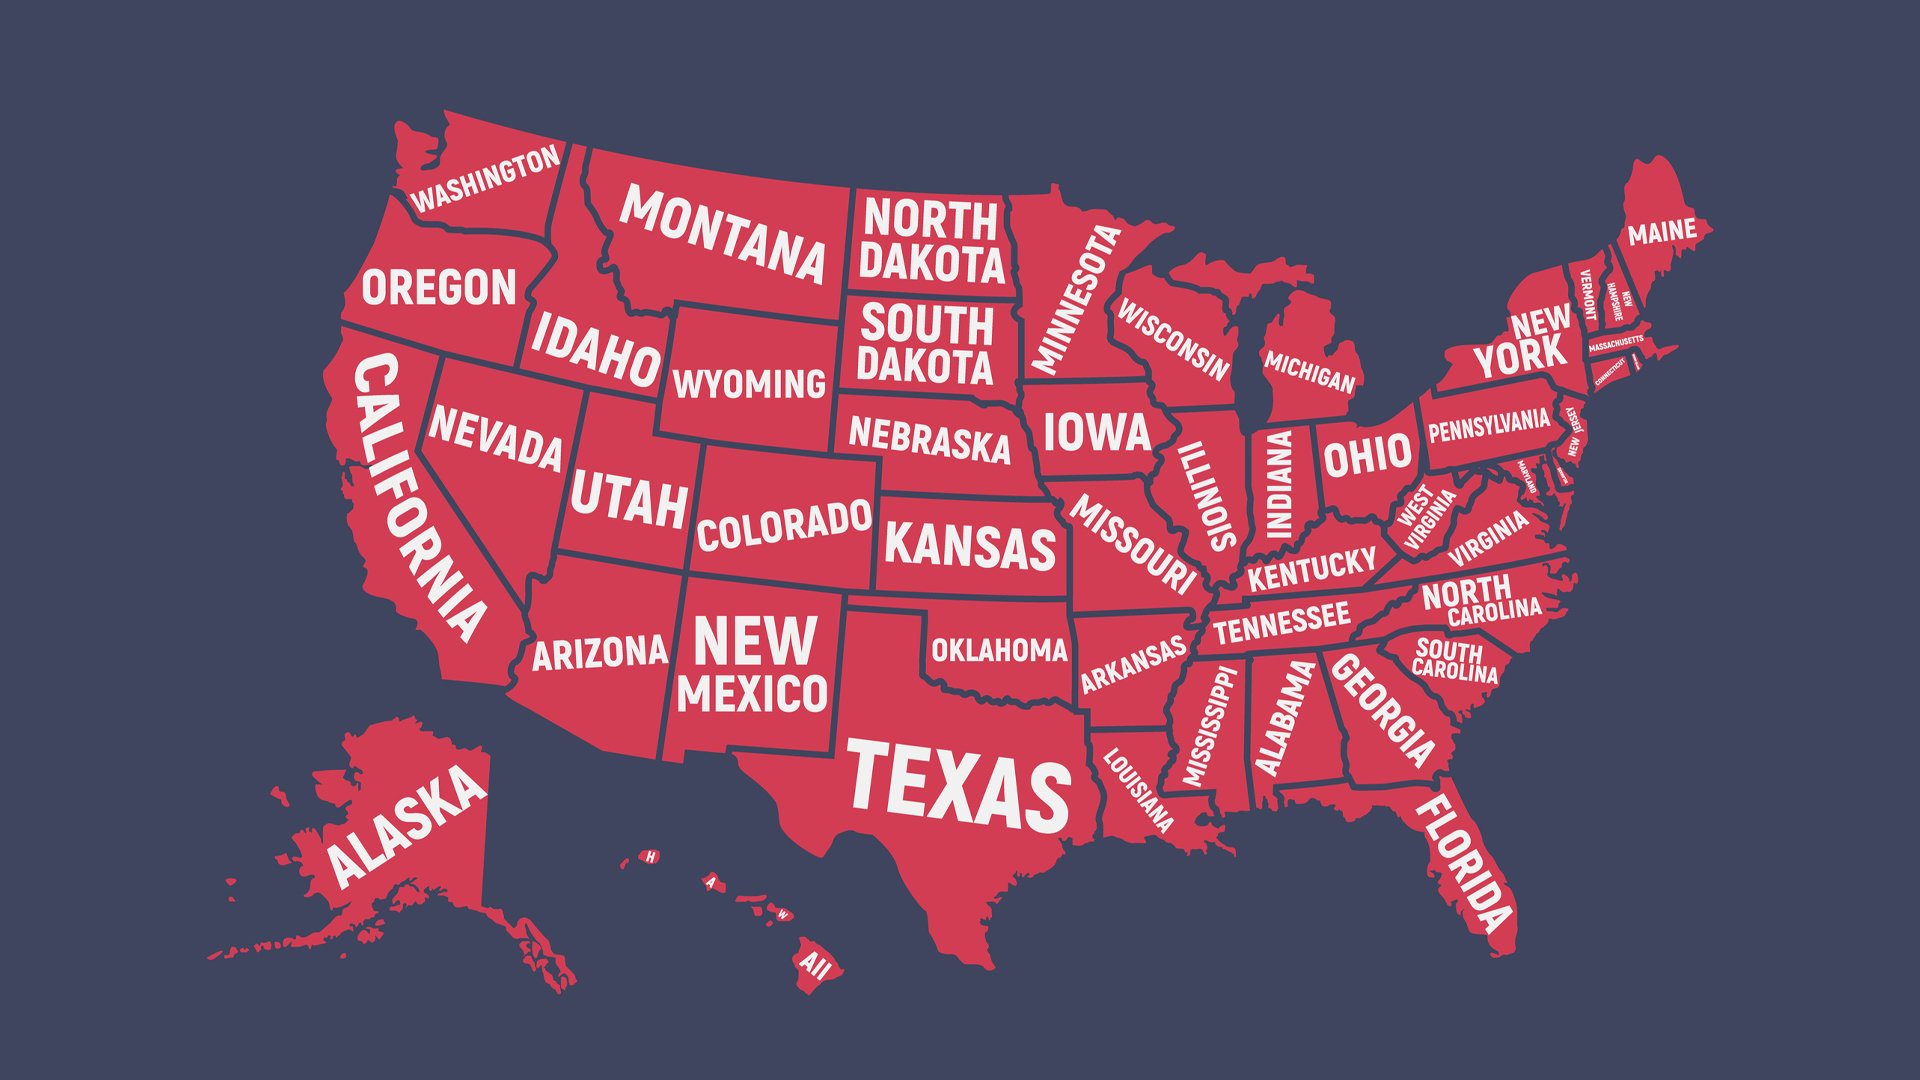 A map of America depicting all the states